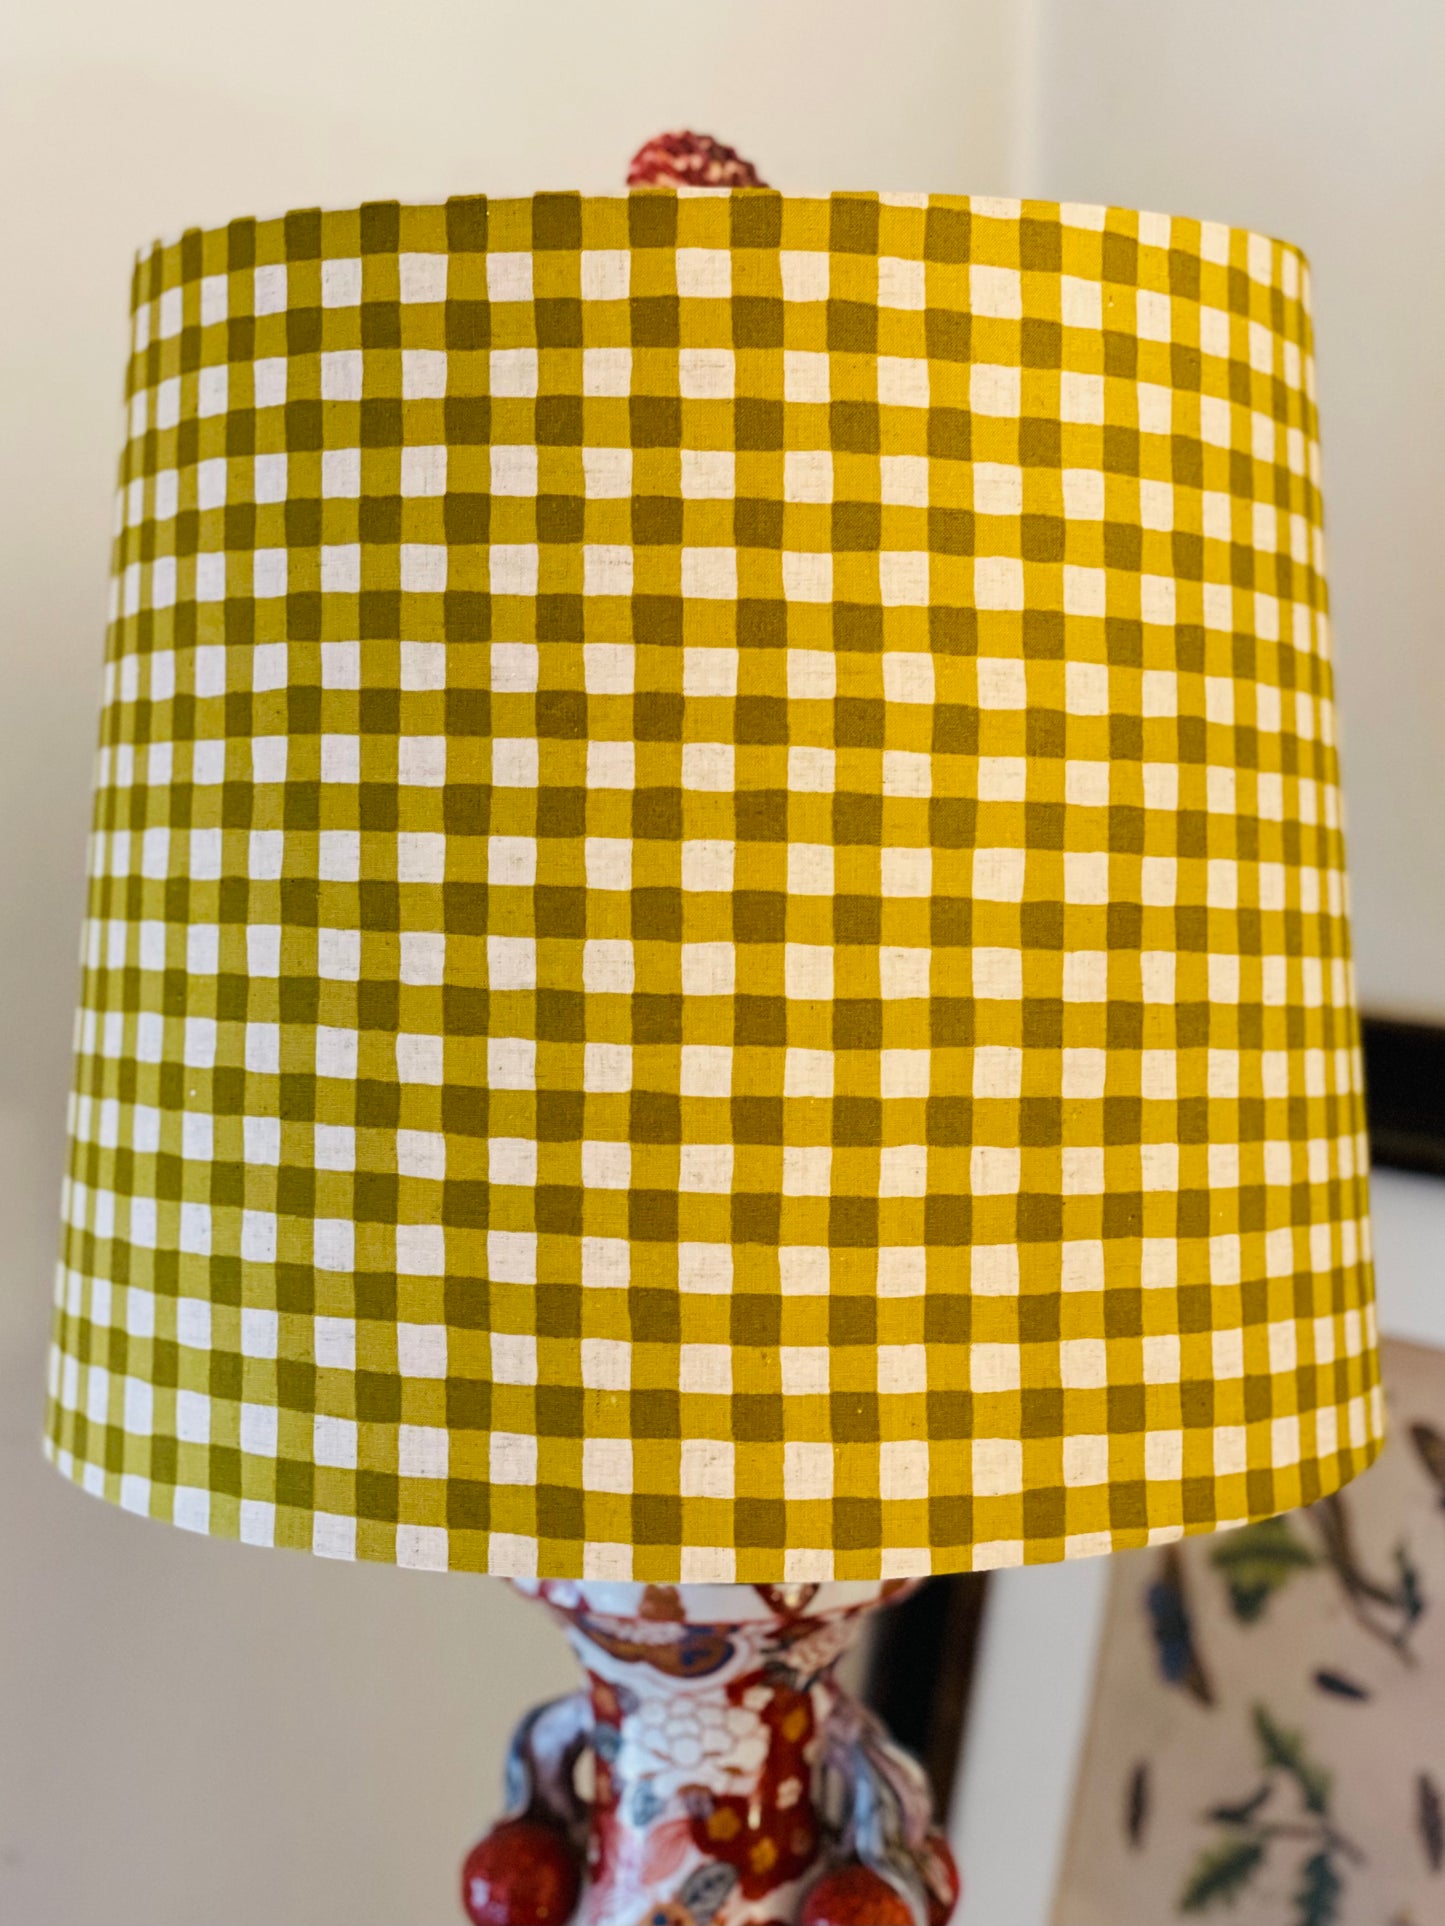 Large Empire Shade. 11.75 x 13.75 x 11.75. Yellow-Green Gingham Cotton-Linen from Japan.